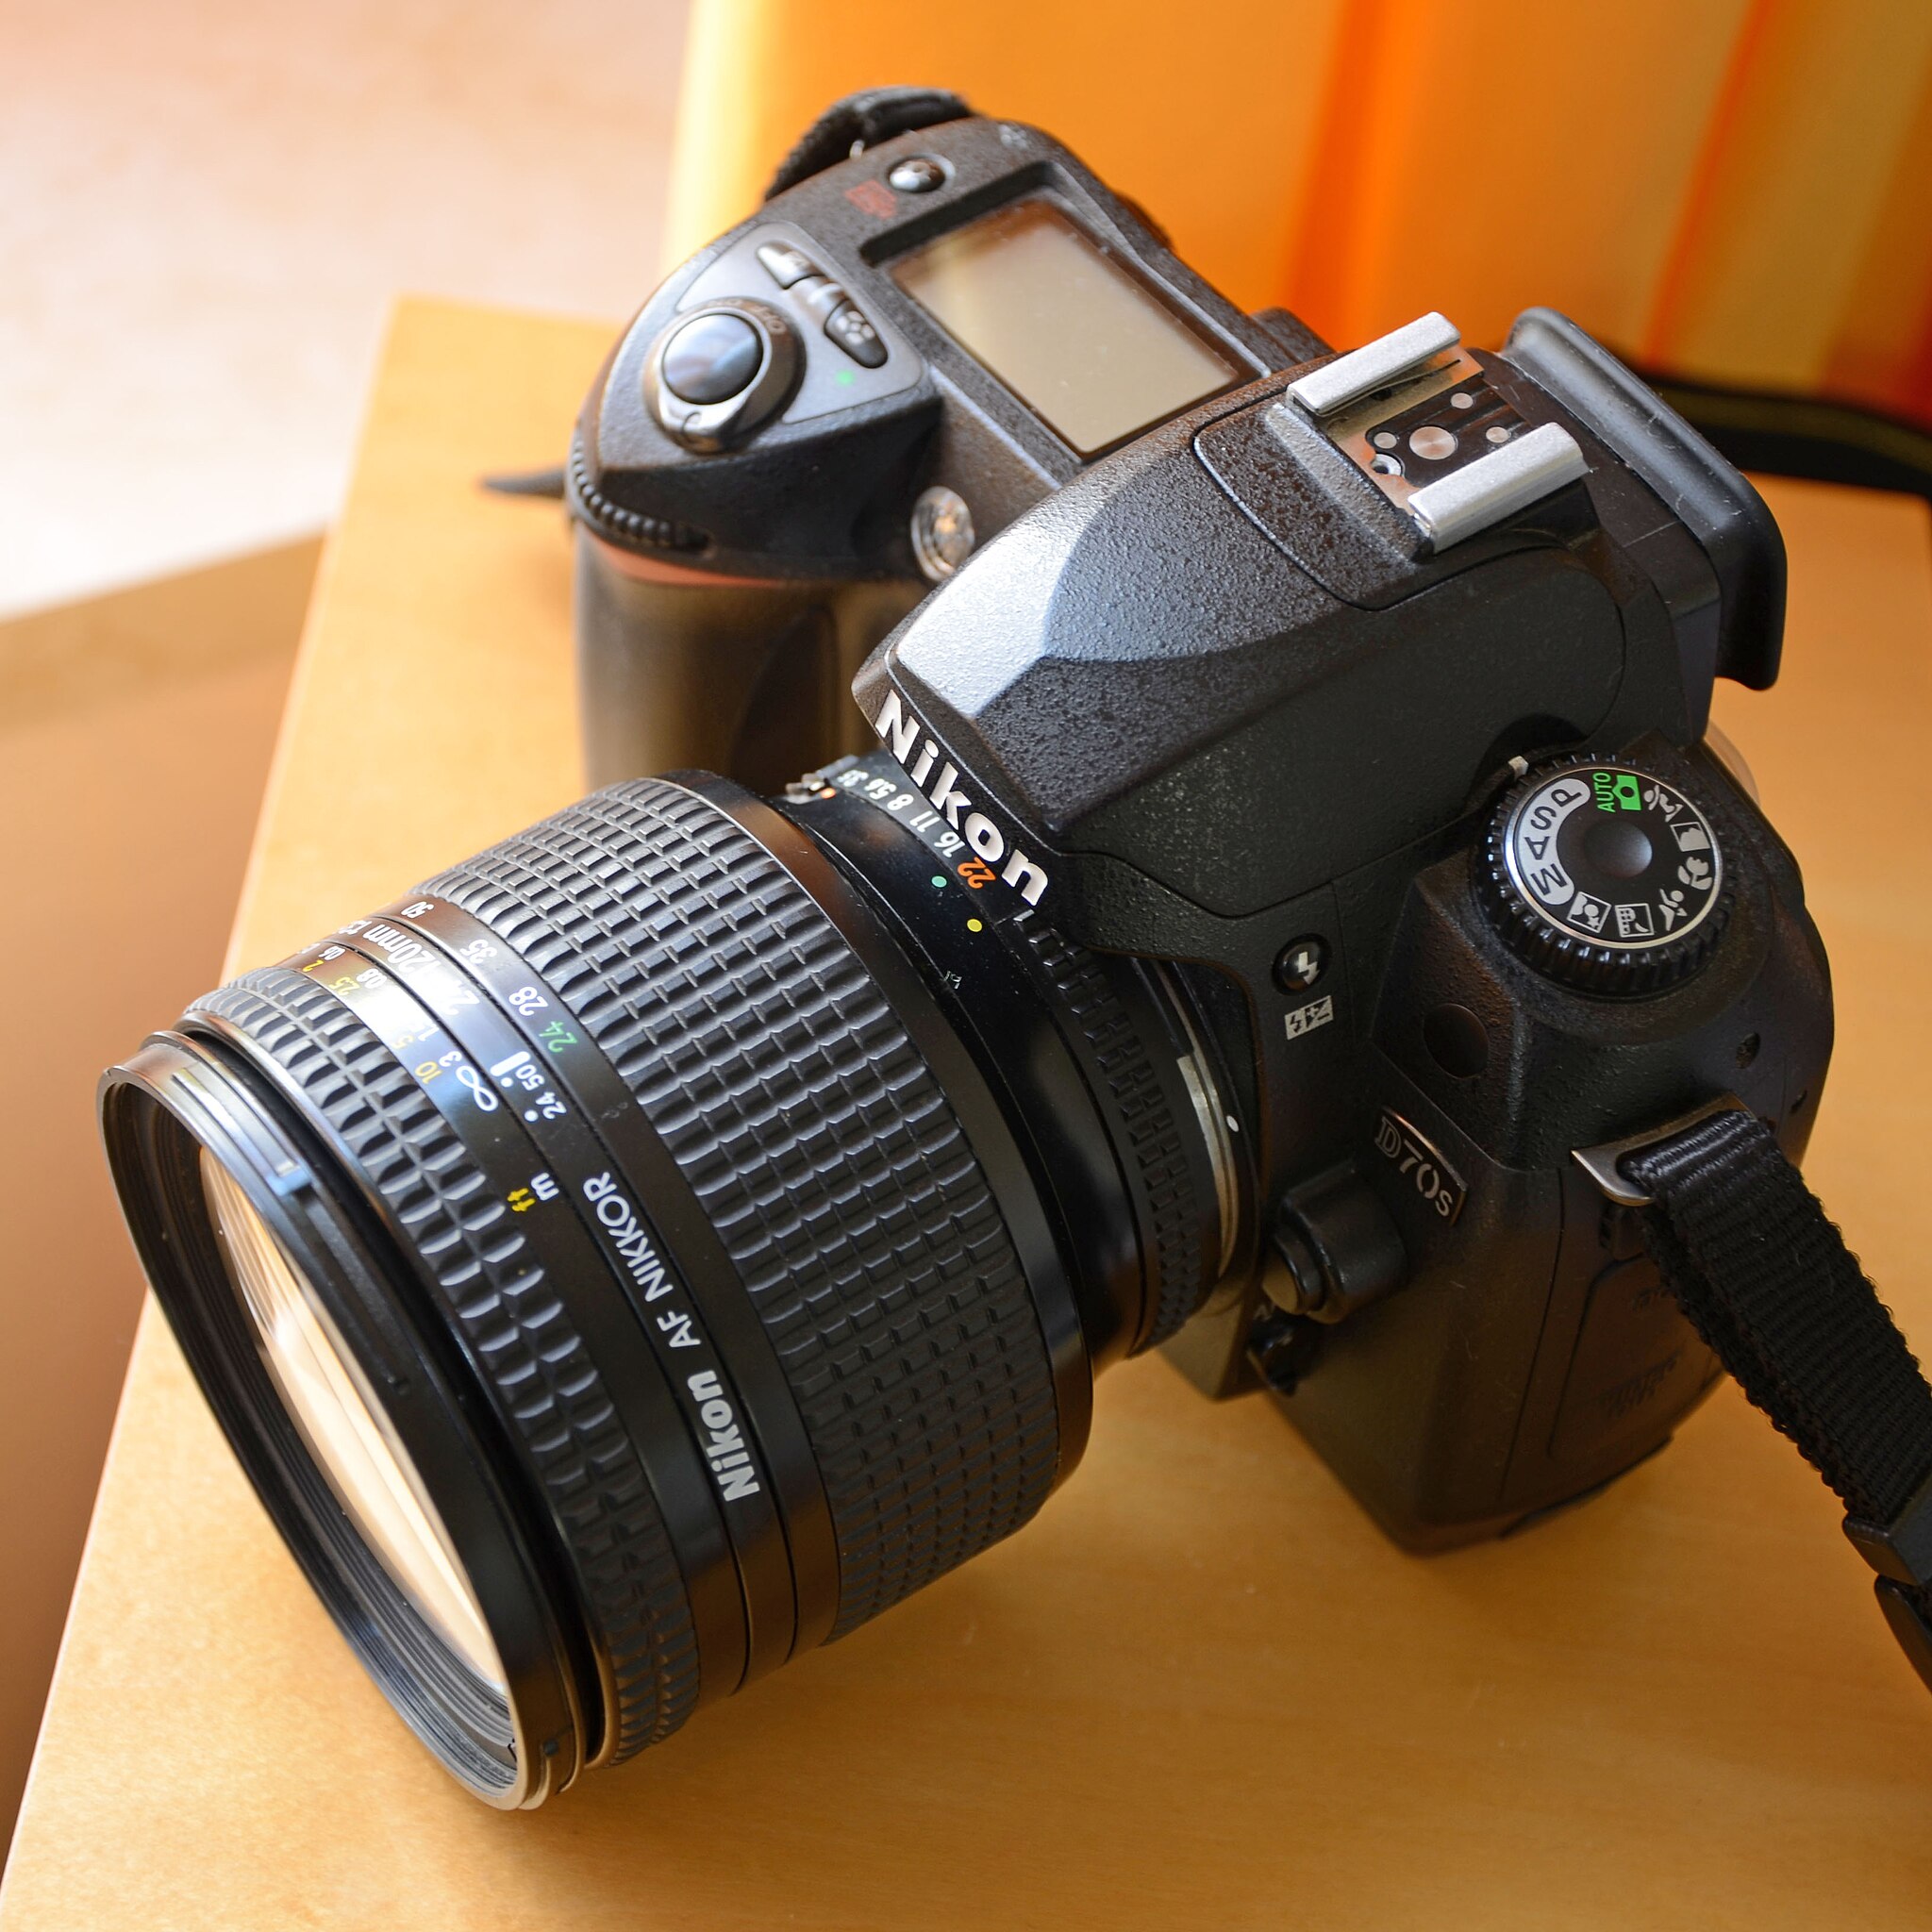 File:Nikon D70s with 24-120mm lens - 8199.jpg - Wikimedia Commons